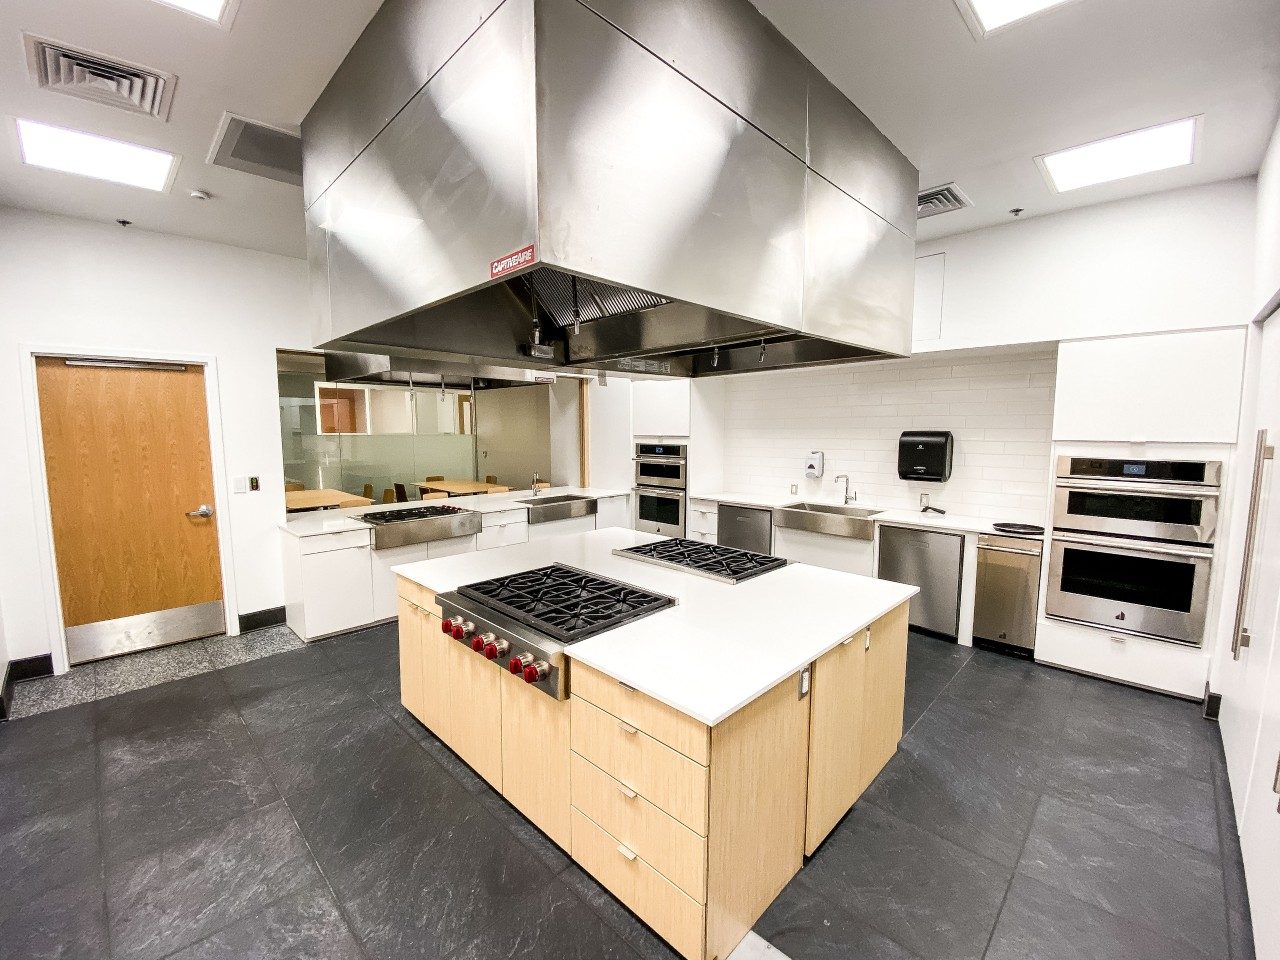 The metabolic kitchen features commercial-grade cooking facilities, including 16 stove burners, four ovens, two dishwashers, kitchen appliances, utensils and cookware, Nutrition Data System for Research access, and a dining and observational area